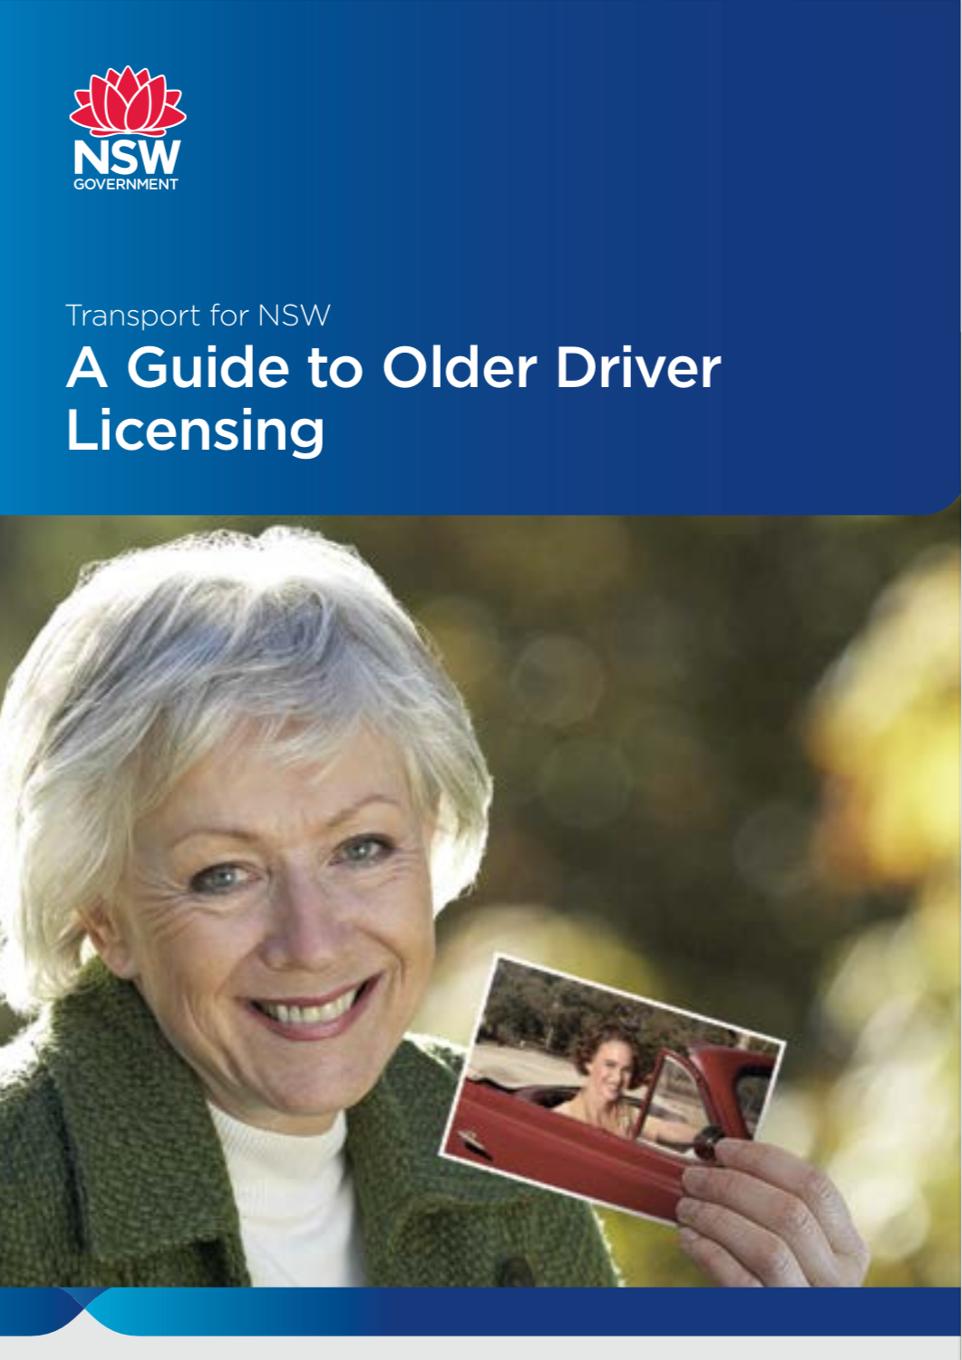 Guide to older driver licensing